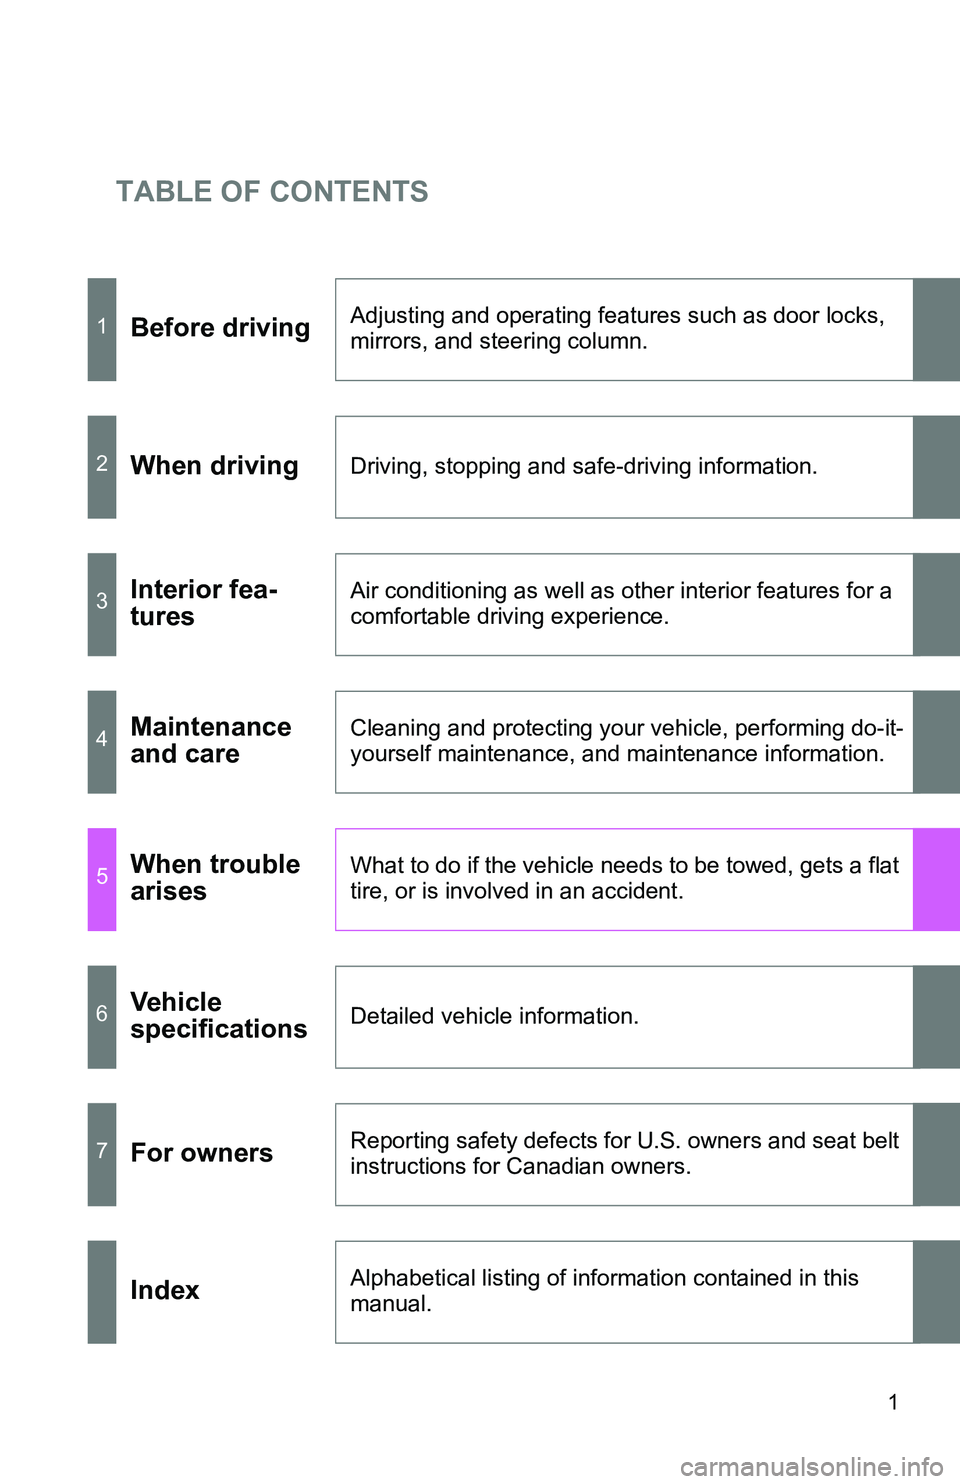 TOYOTA xB 2011  Owners Manual (in English) TABLE OF CONTENTS
1
1Before drivingAdjusting and operating features such as door locks, 
mirrors, and steering column.
2When drivingDriving, stopping and safe-driving information.
3Interior fea-
tures